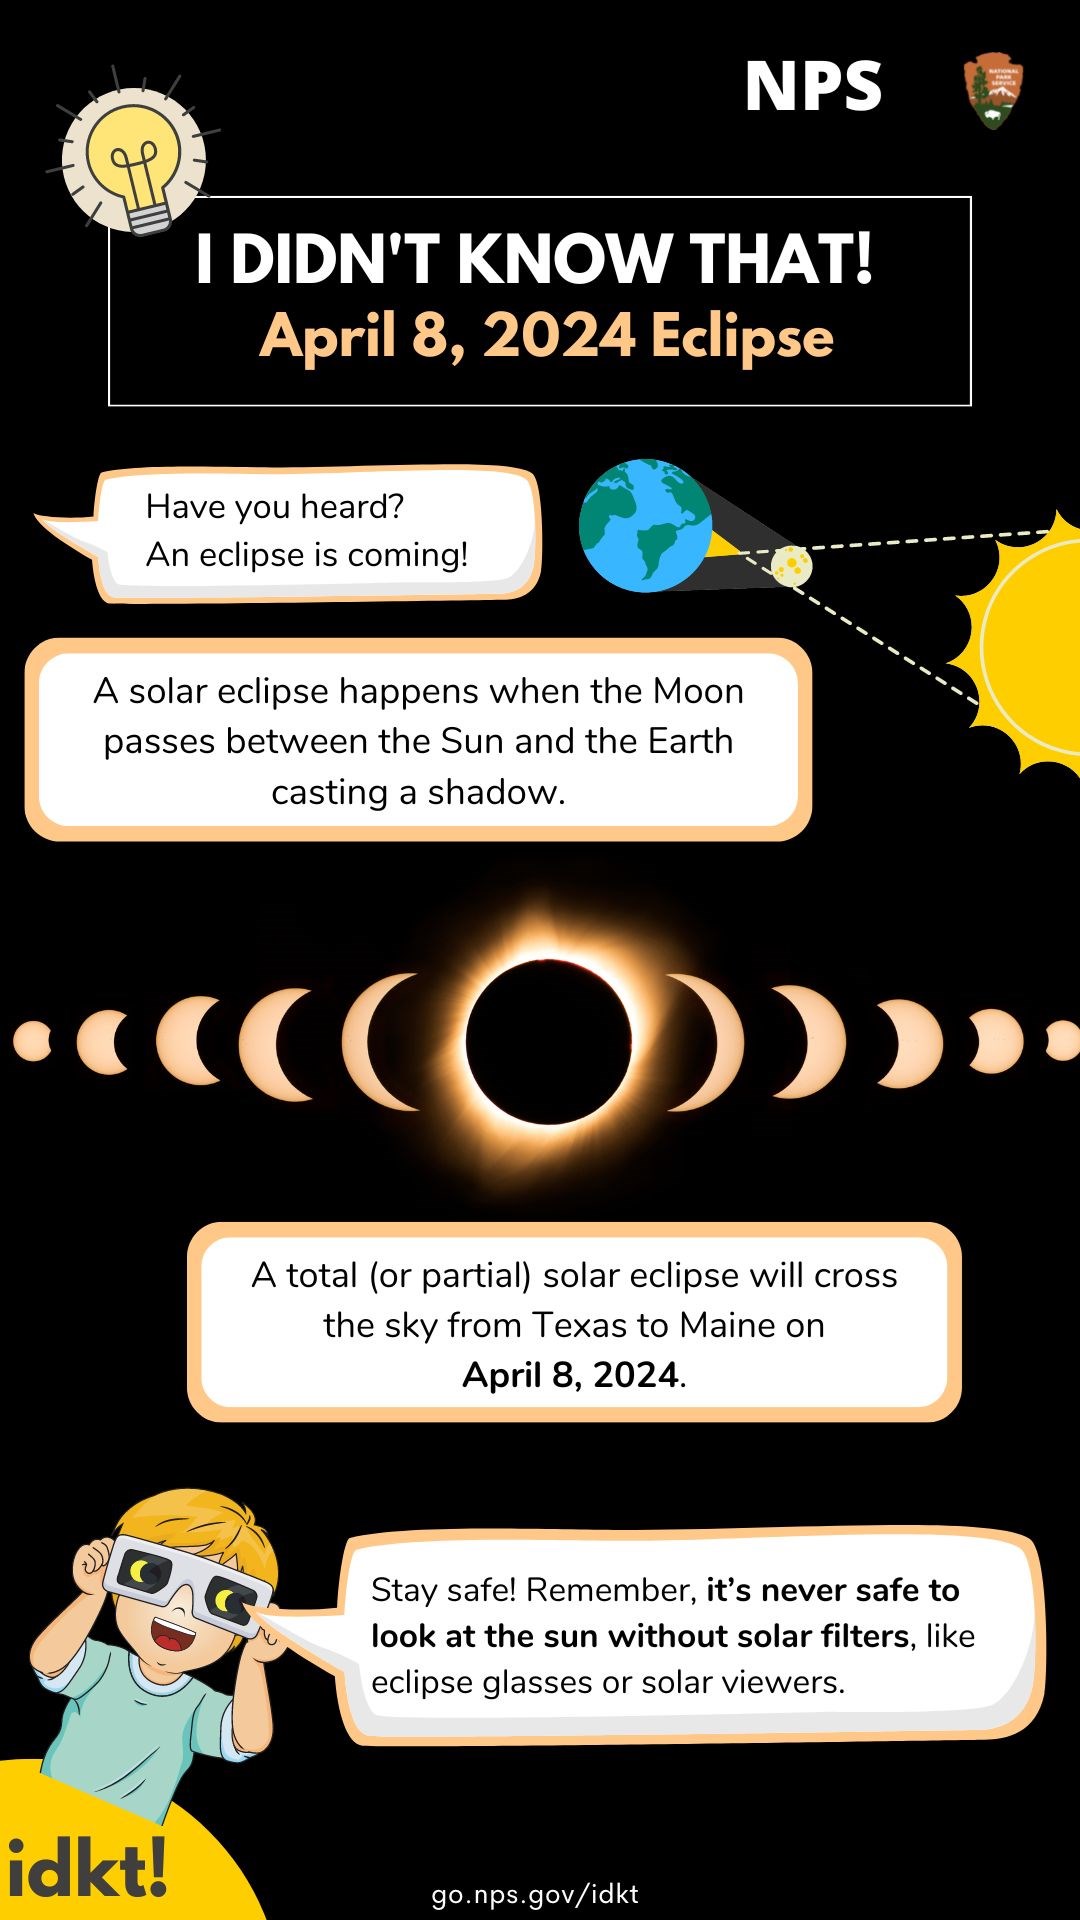 an infographic with information on the upcoming eclipse on April 8, 2024. Full alt text available below the image